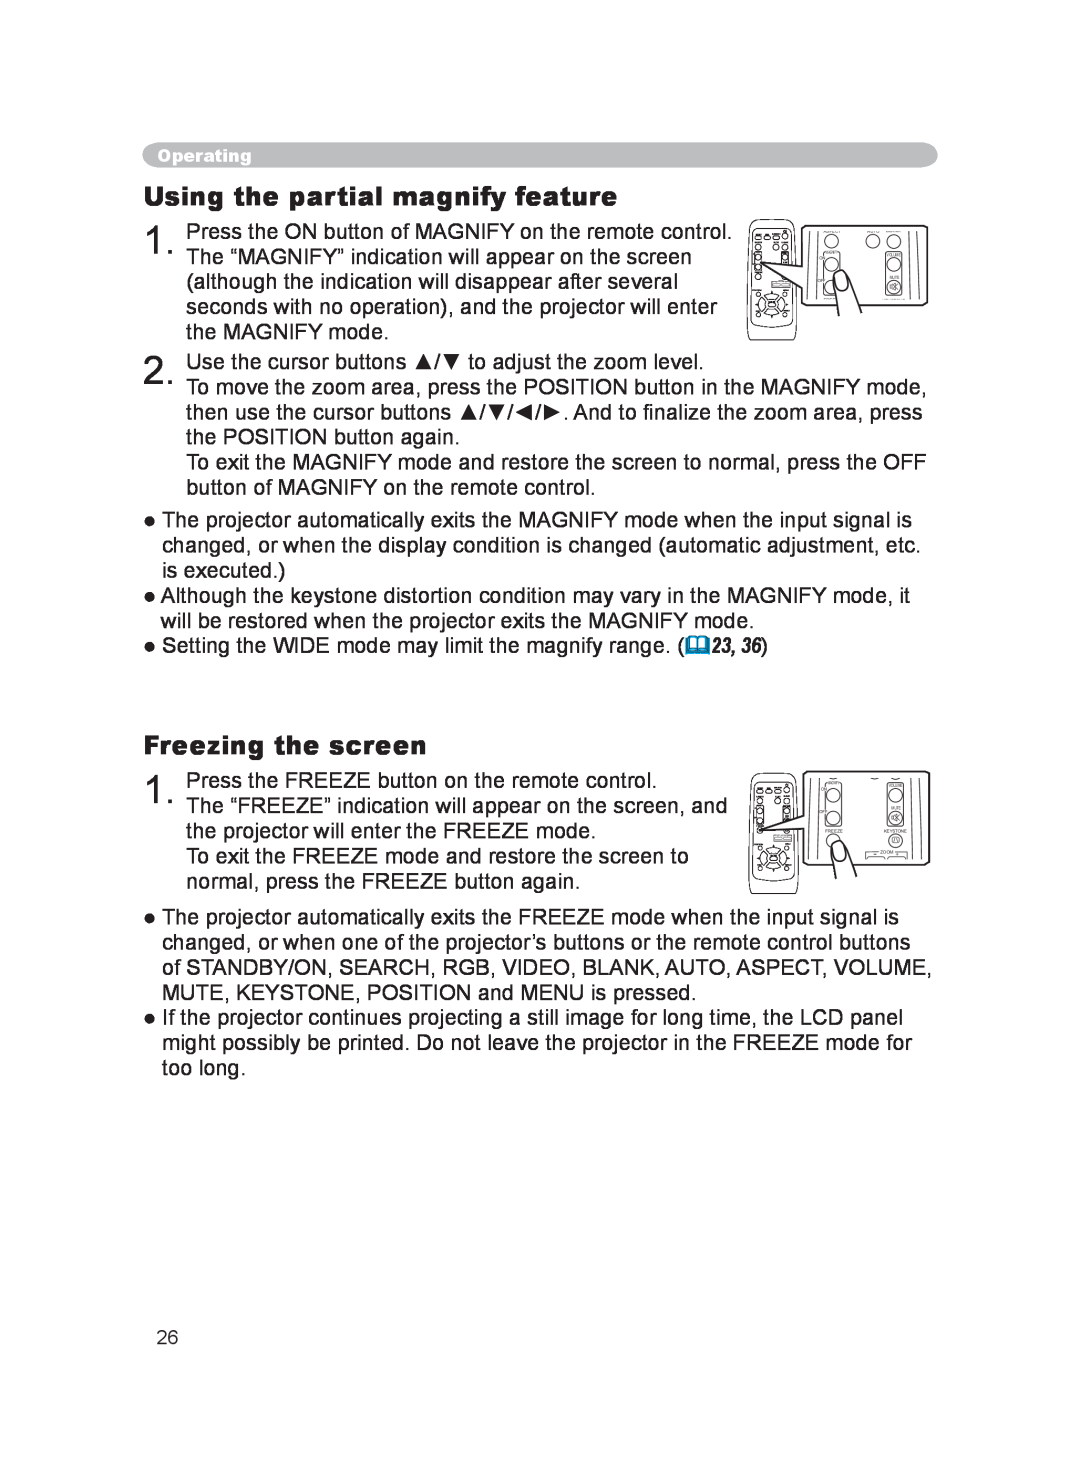 Hitachi PJ-LC9 user manual Using the partial magnify feature, Freezing the screen 